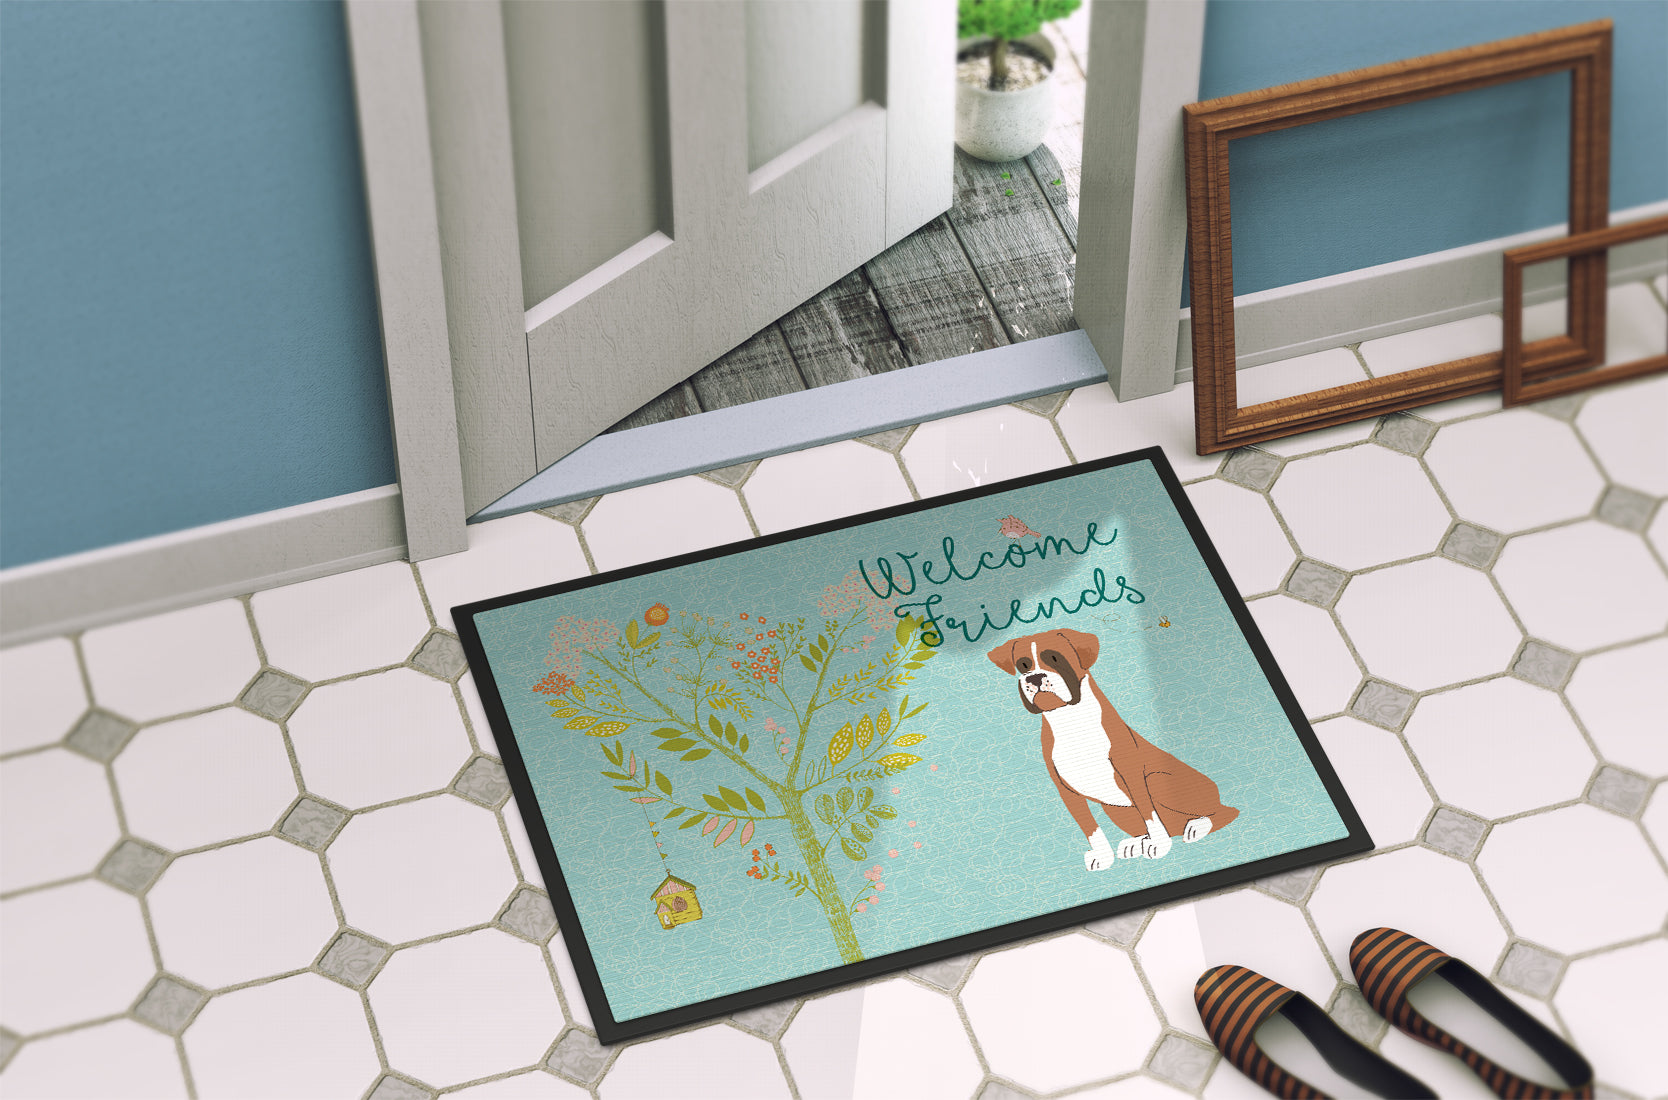 Welcome Friends Flashy Fawn Boxer Indoor or Outdoor Mat 18x27 BB7582MAT - the-store.com